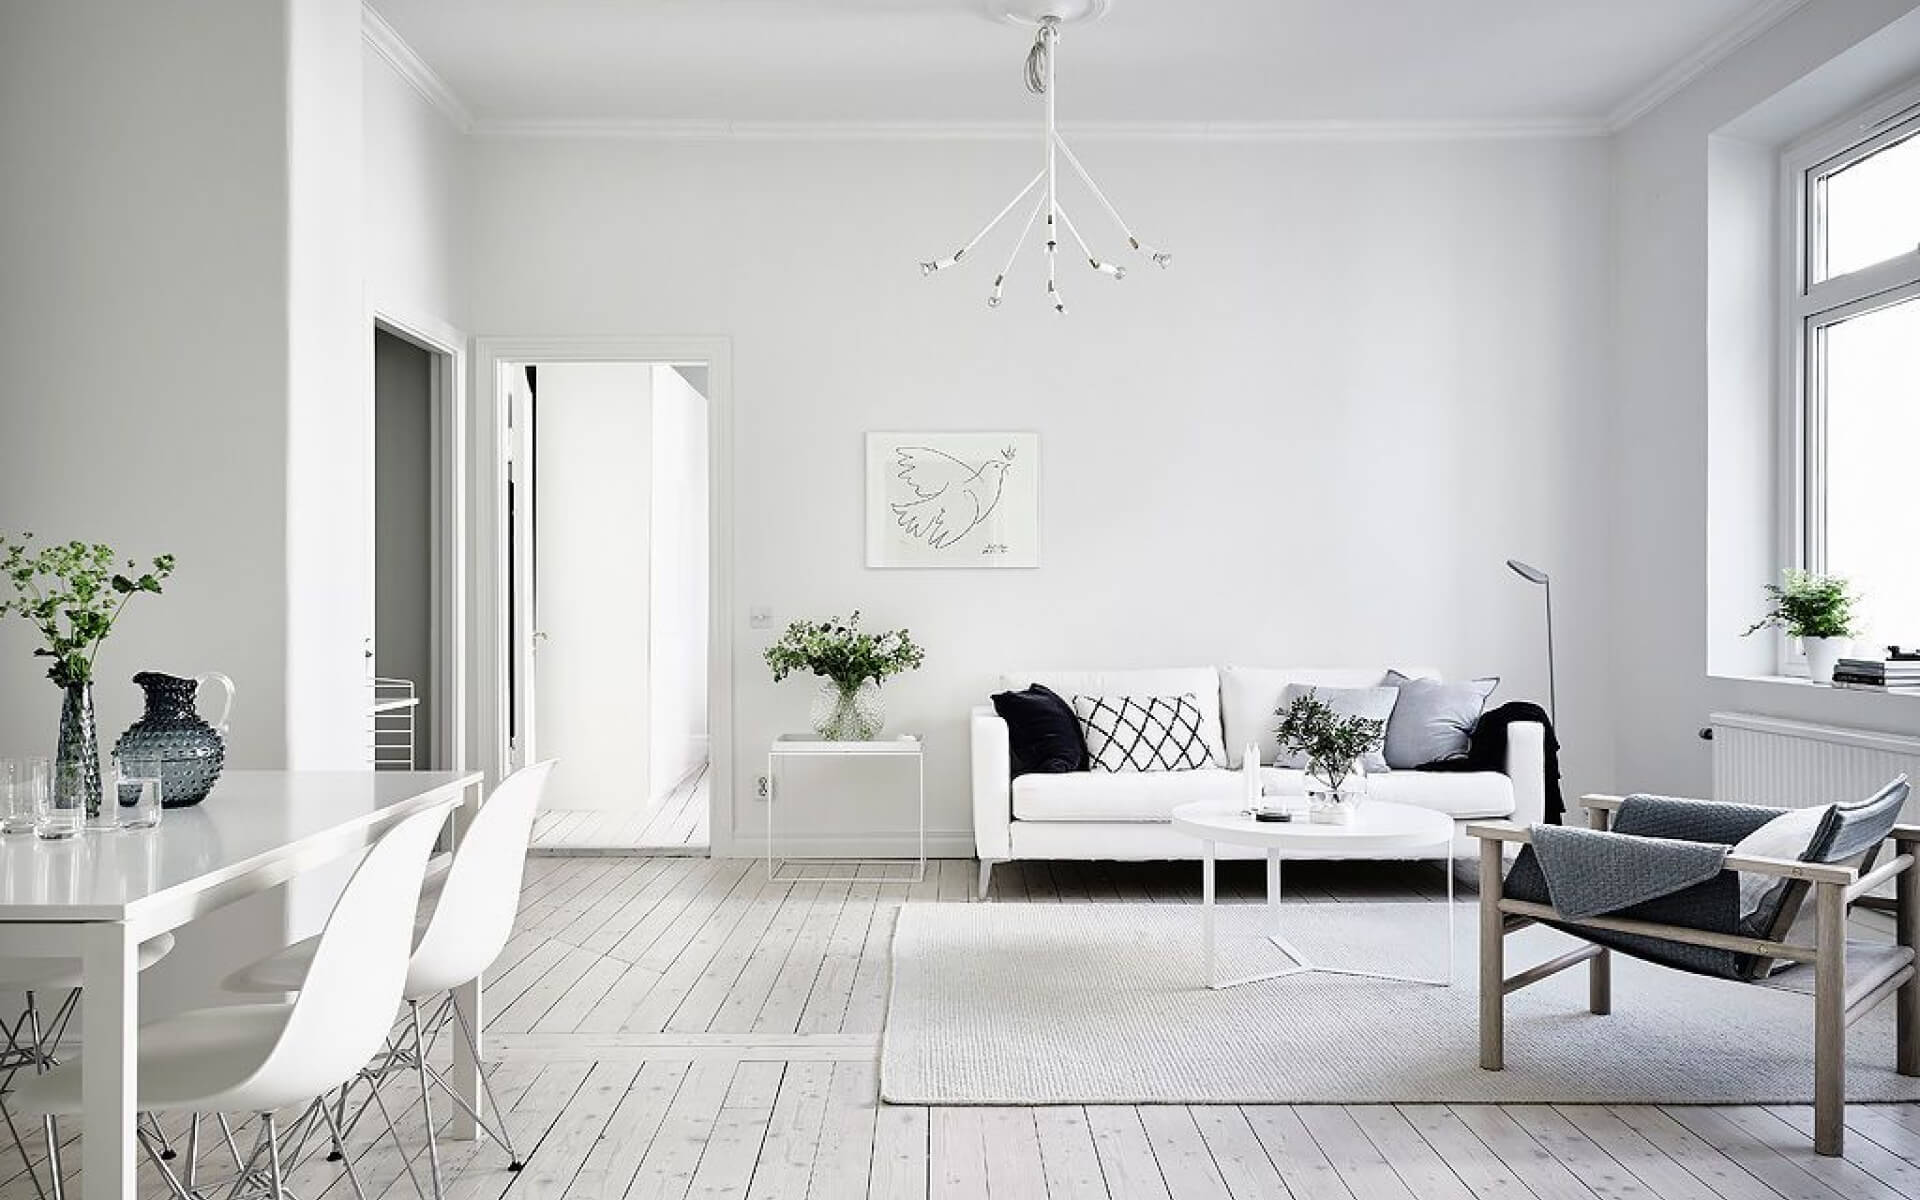 Living room in a minimalistic style, decorated with plants and white tones.